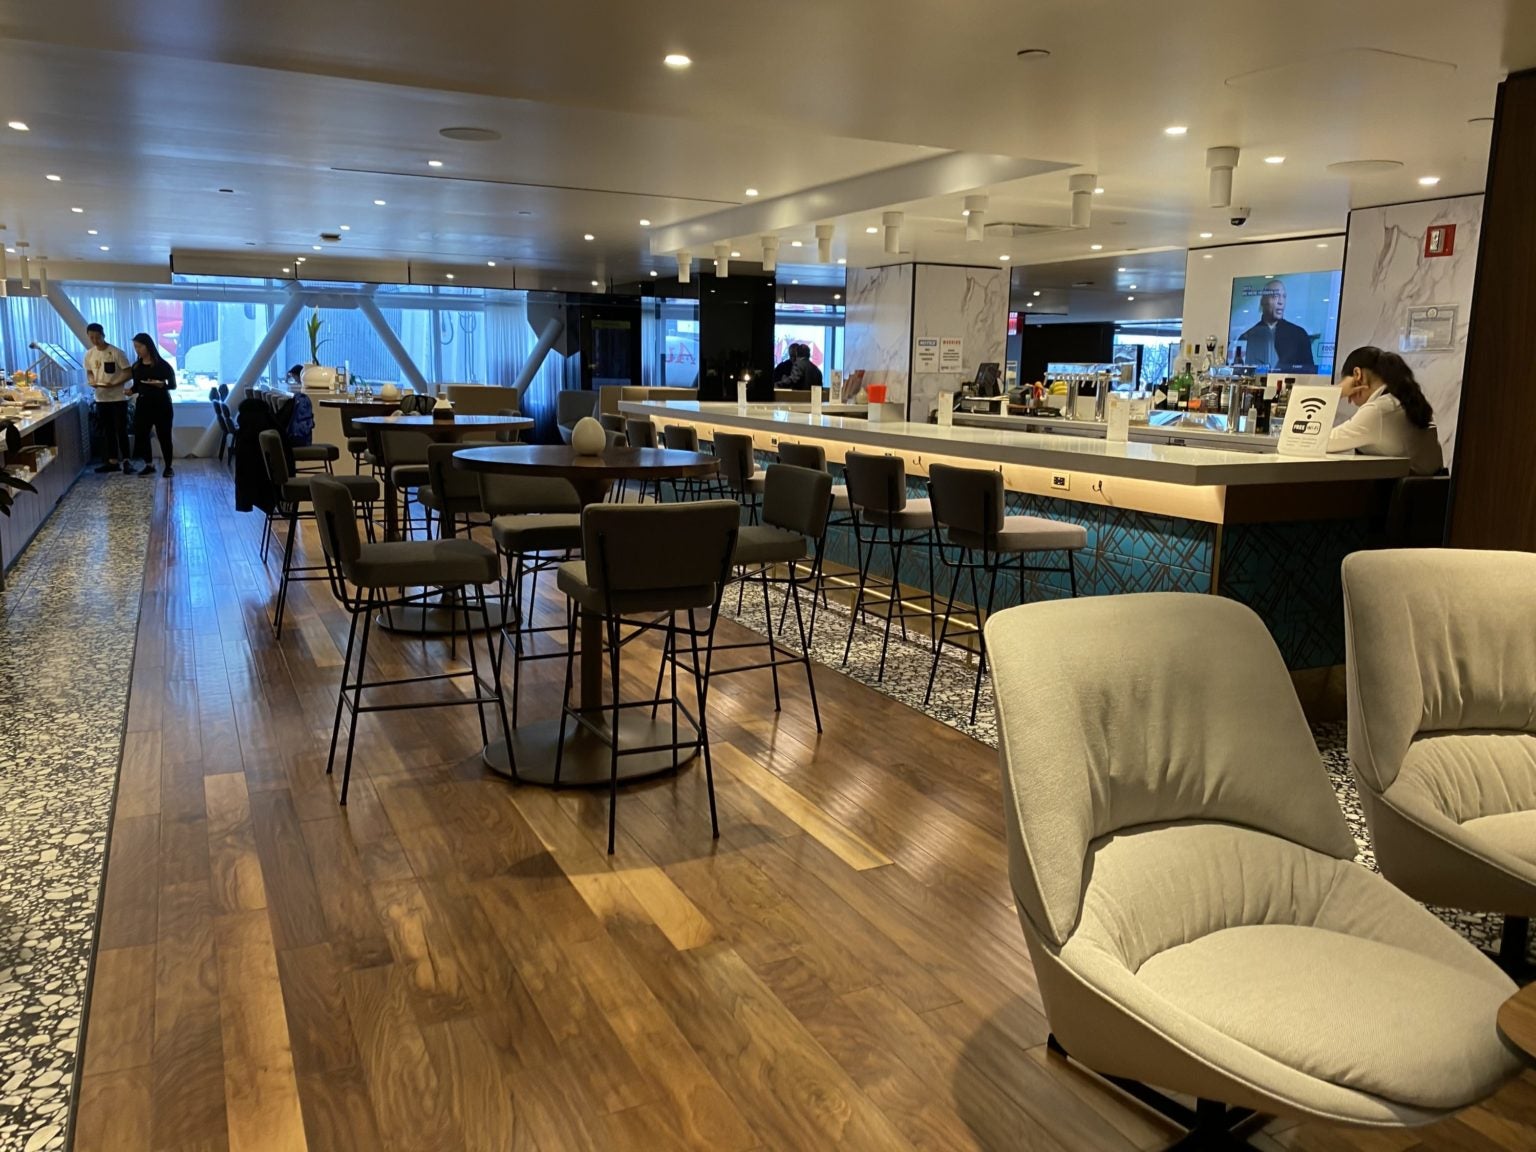 priority pass travel lounges